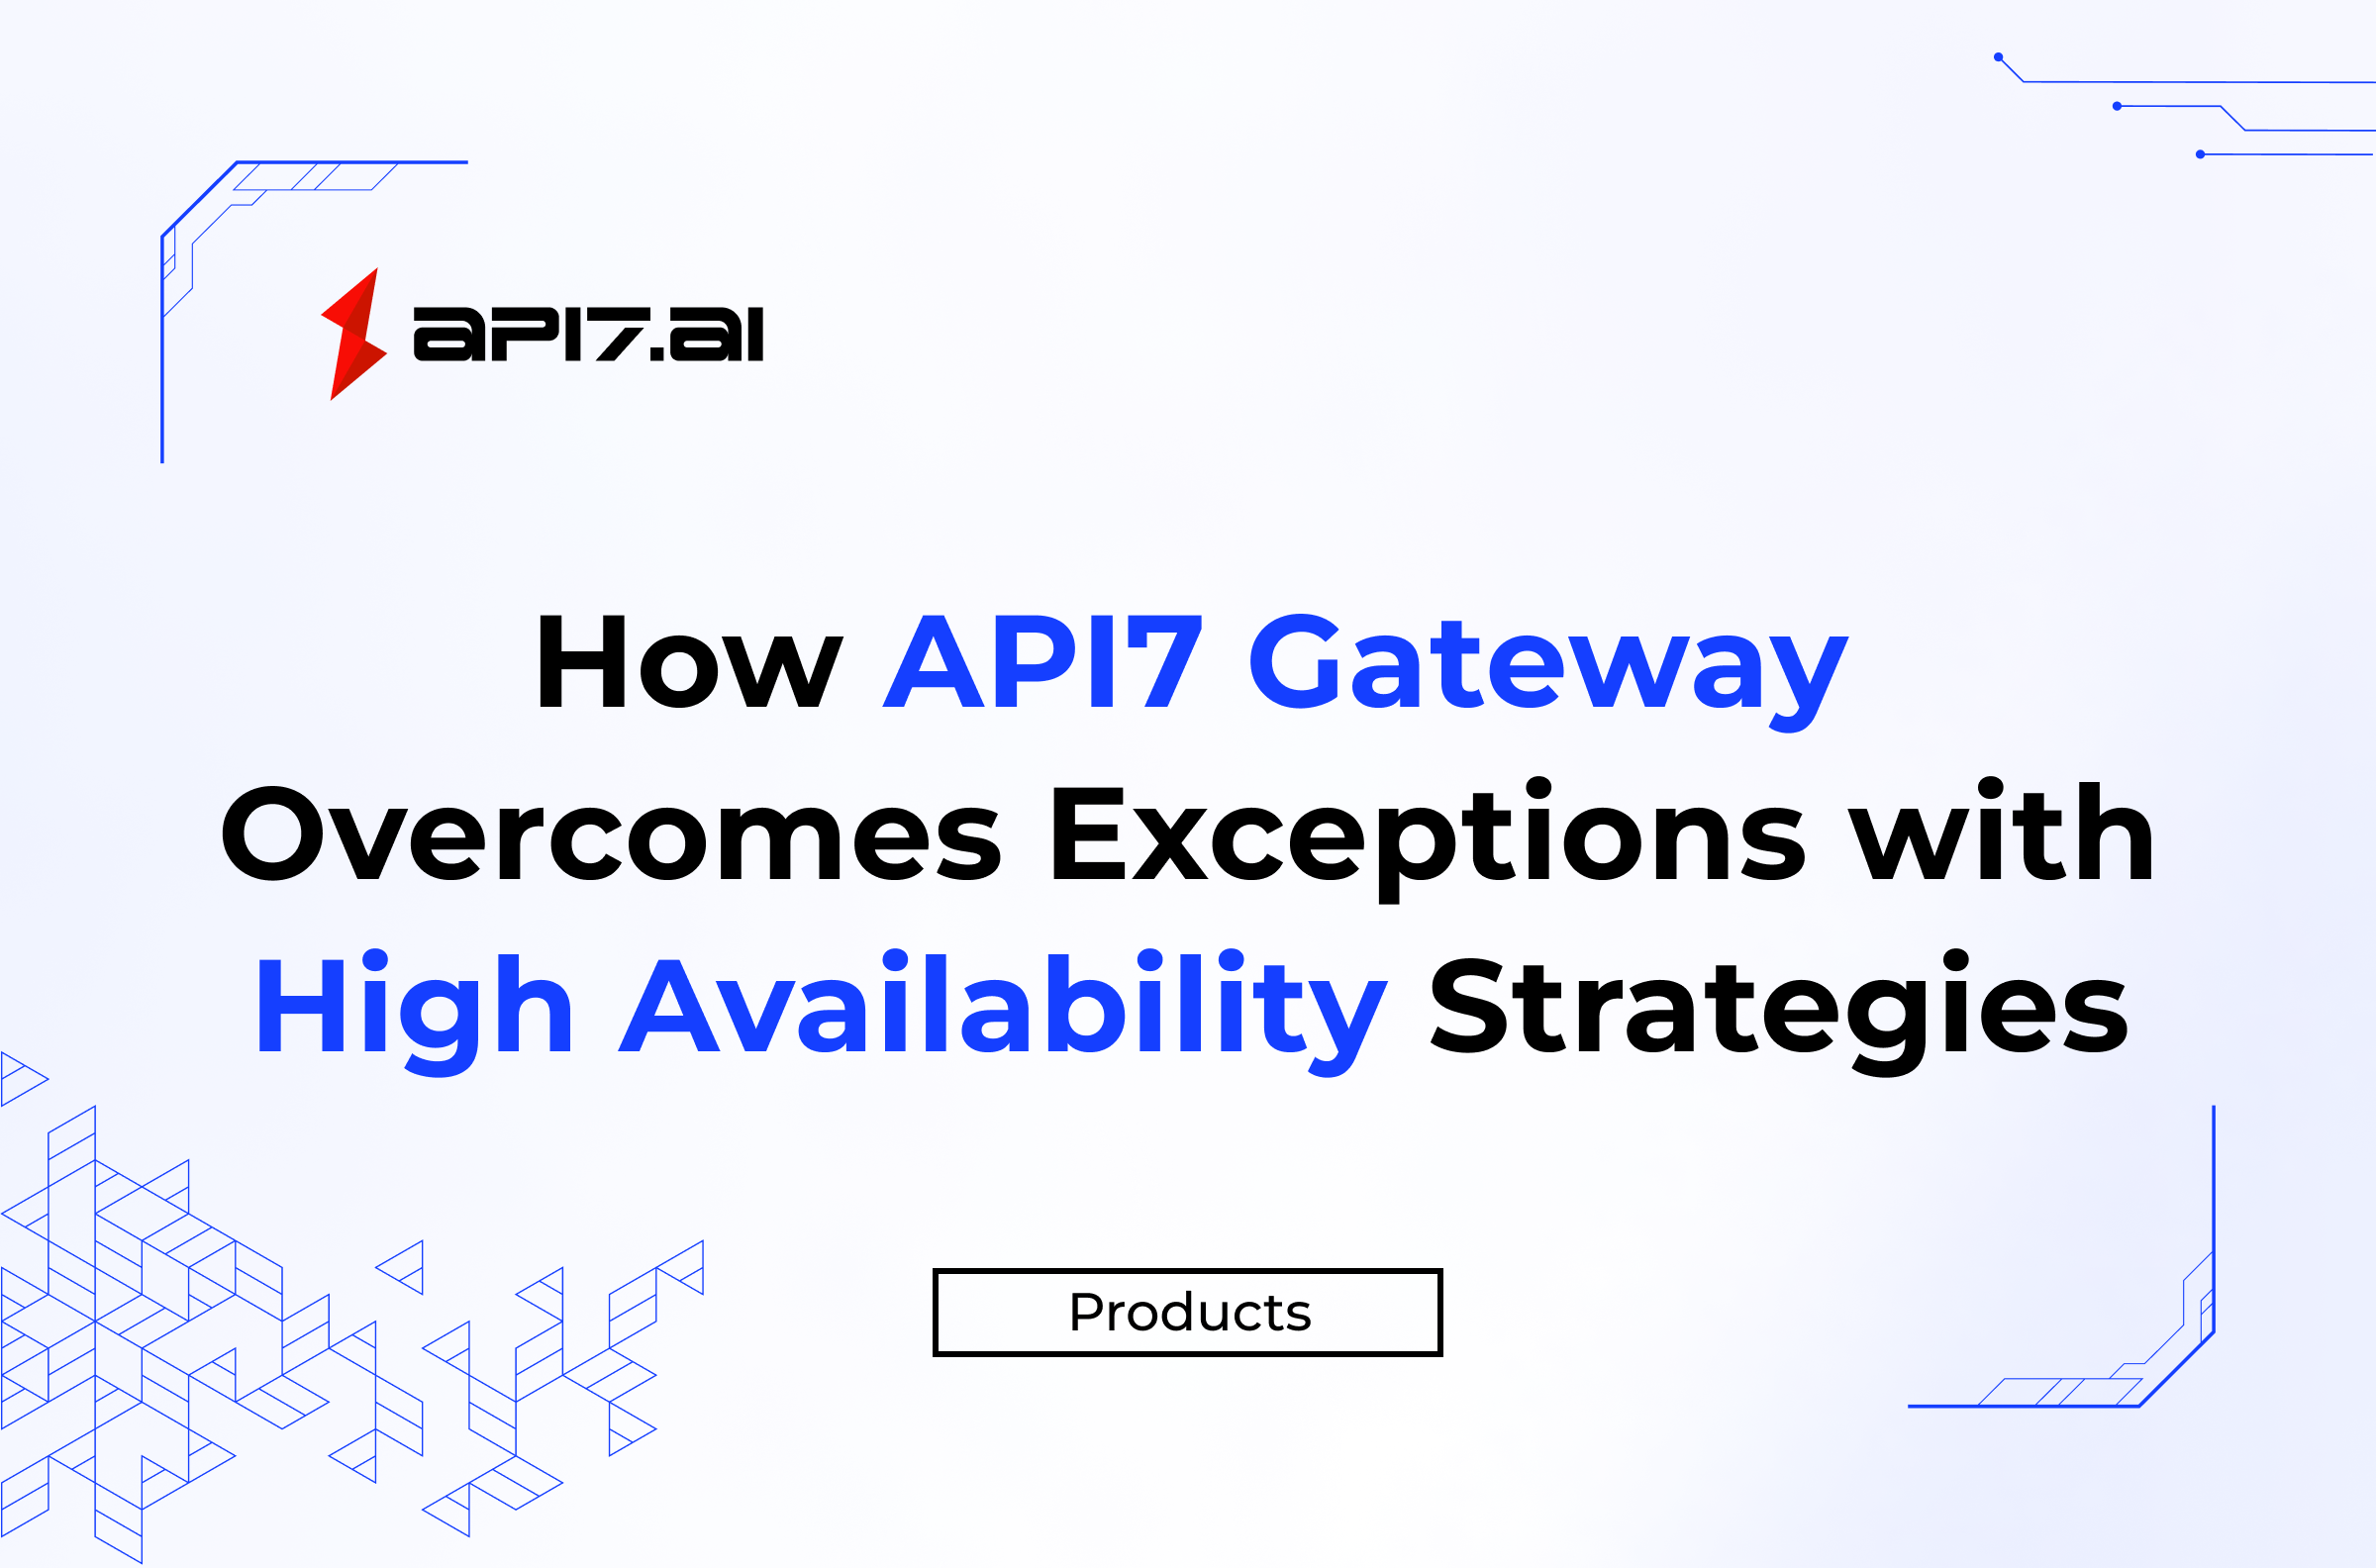 How API7 Gateway Overcomes Exceptions with High Availability Strategies